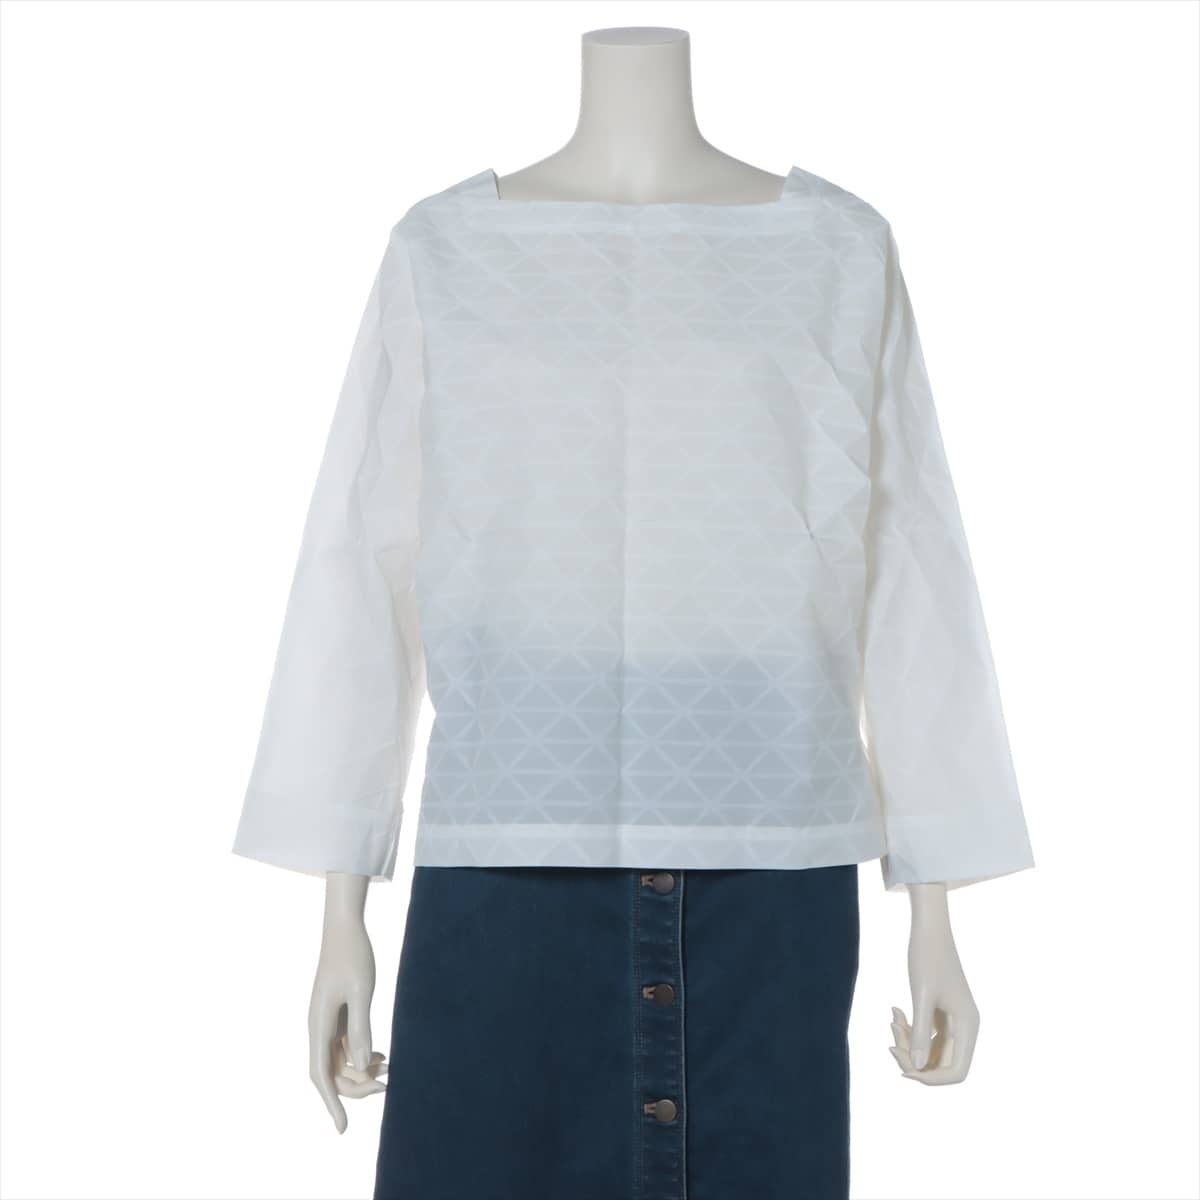 ISSEY MIYAKE Unknown material Blouse 2 Ladies' White No sign tag No brand tag BU005 triangle peace print